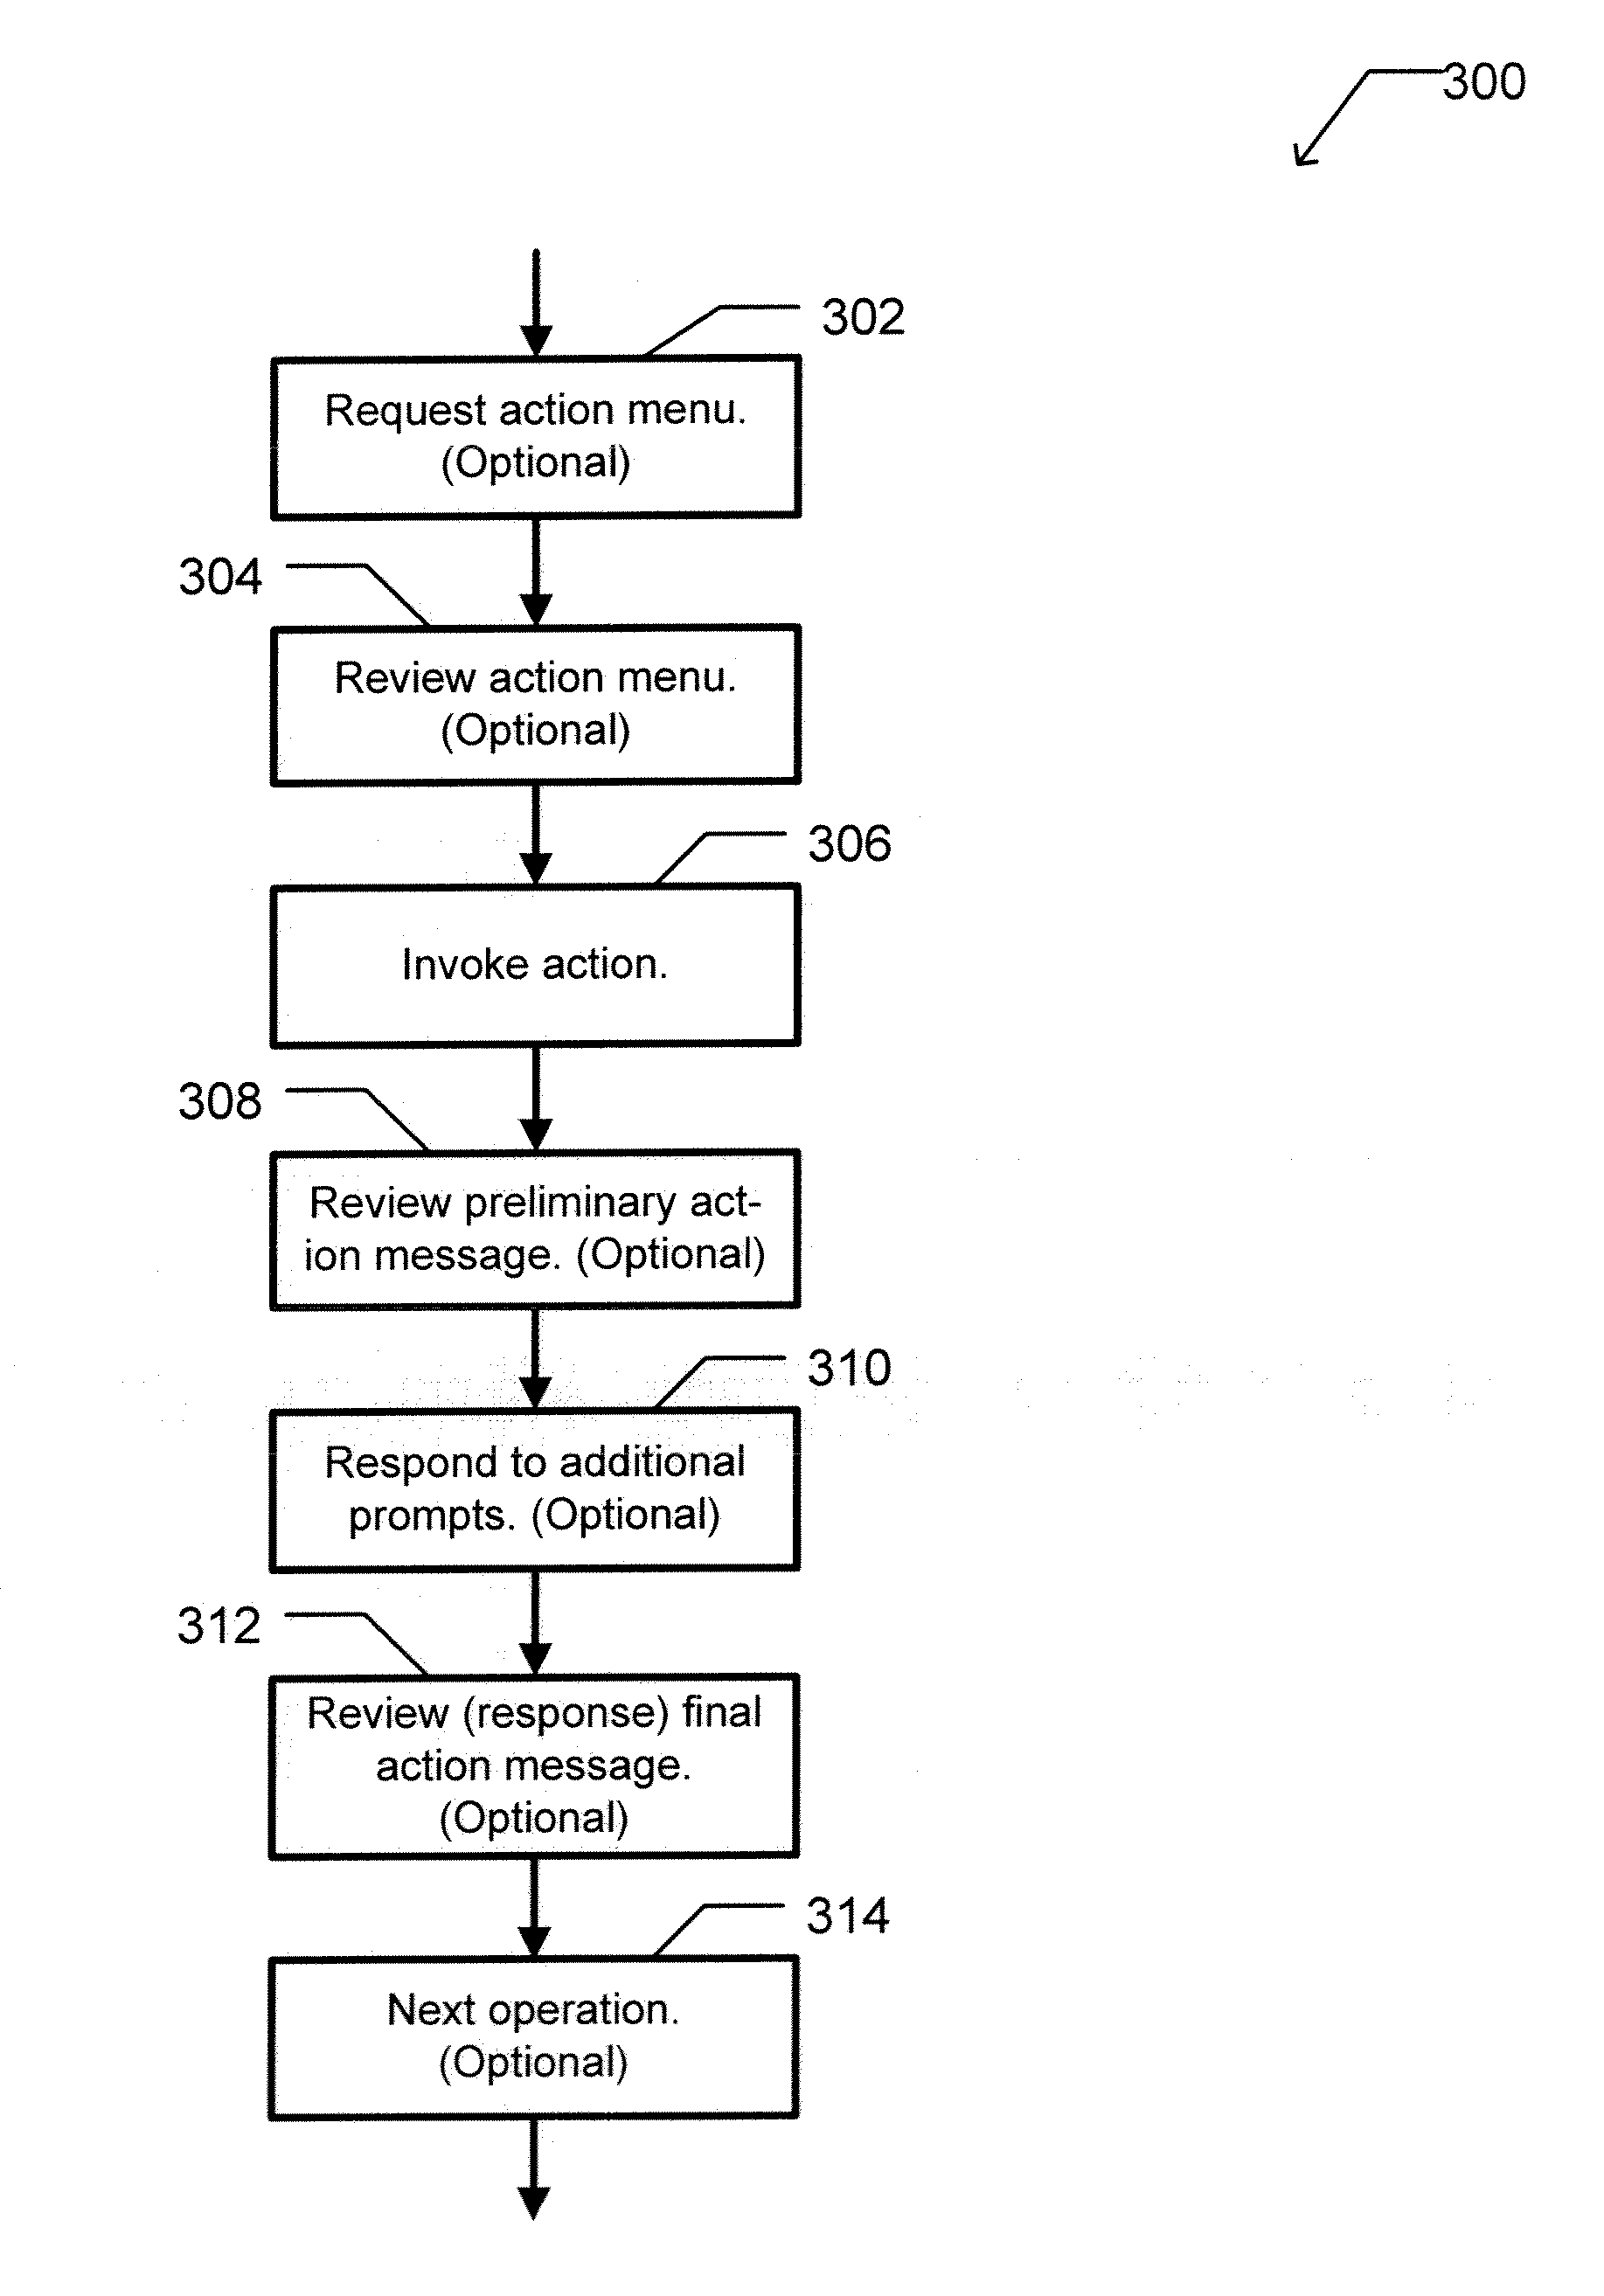 Apparatus and method for mixing business intelligence and business process workflows